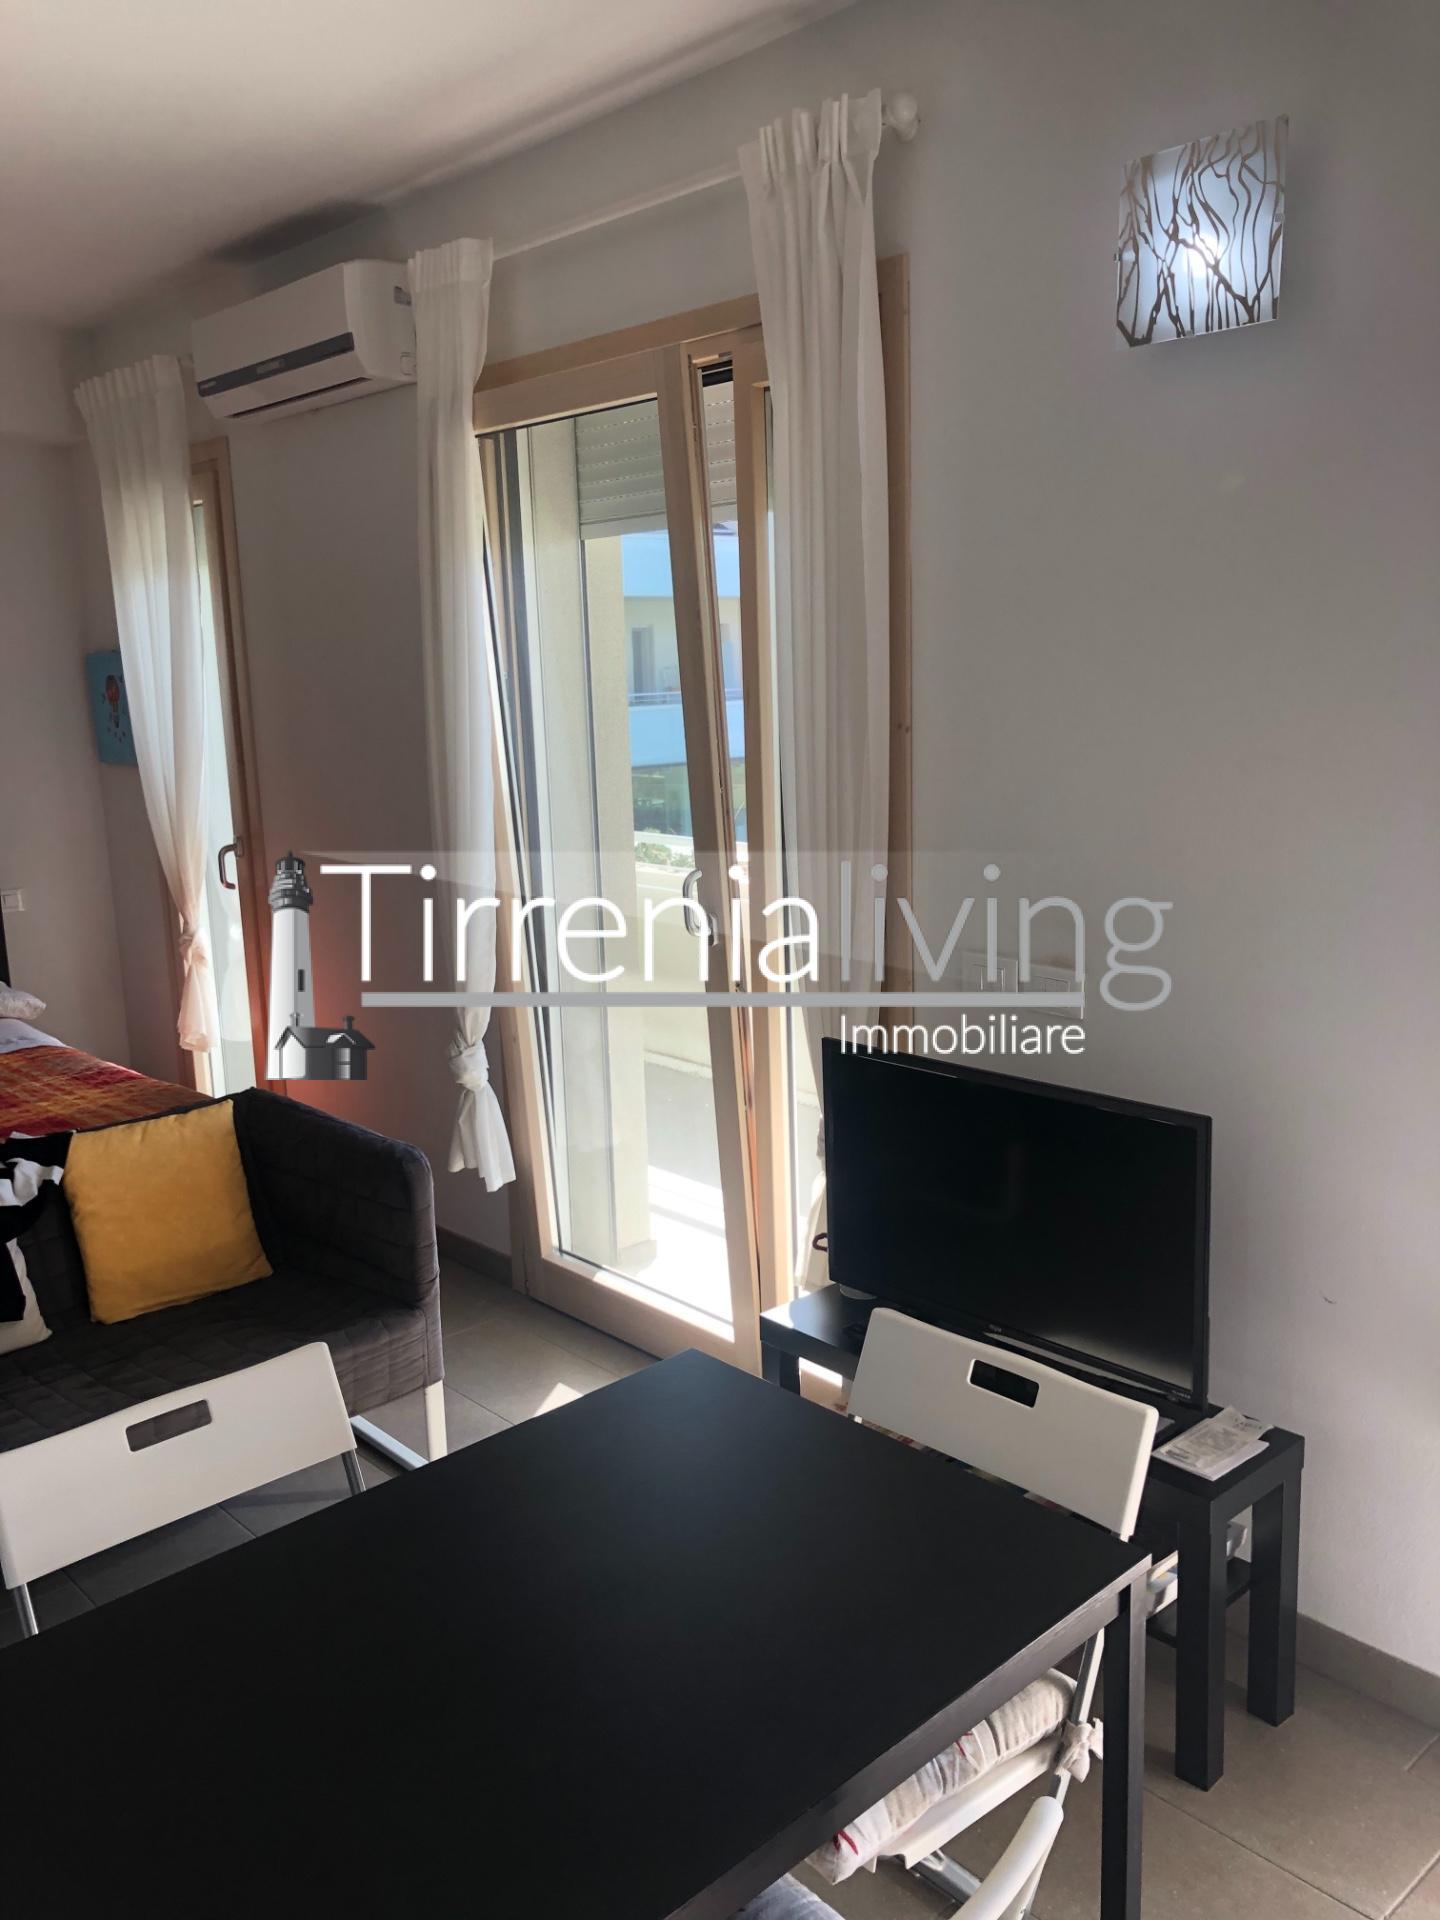 Apartment for rent, ref. A-504